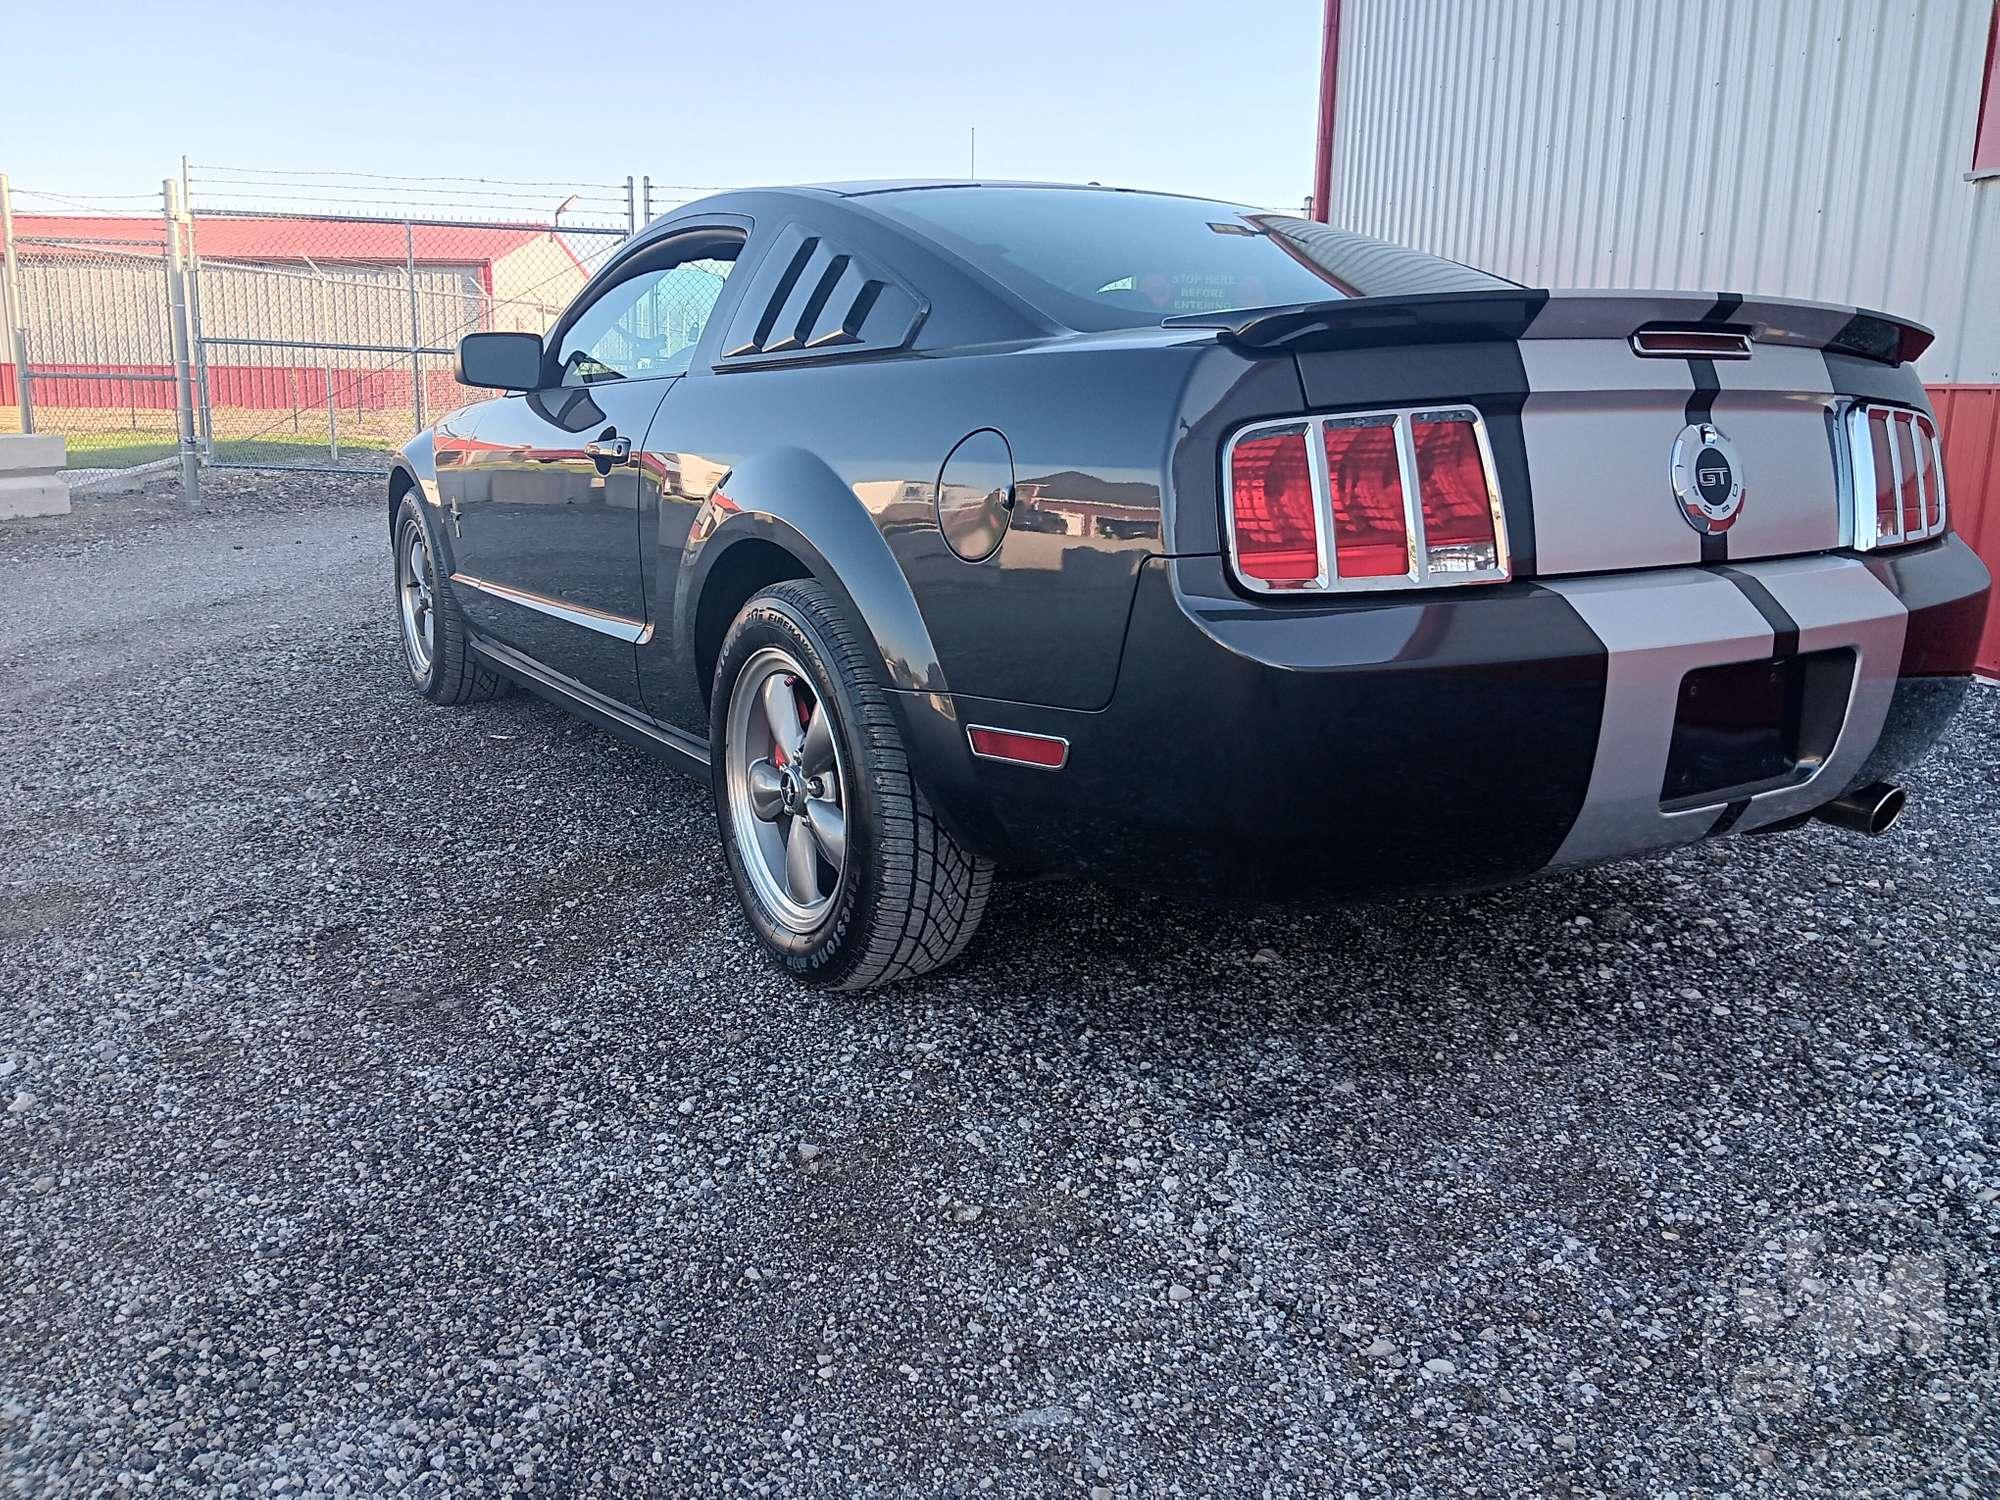 2007 FORD MUSTANG VIN: 1ZVFT80N575325300 COUPE